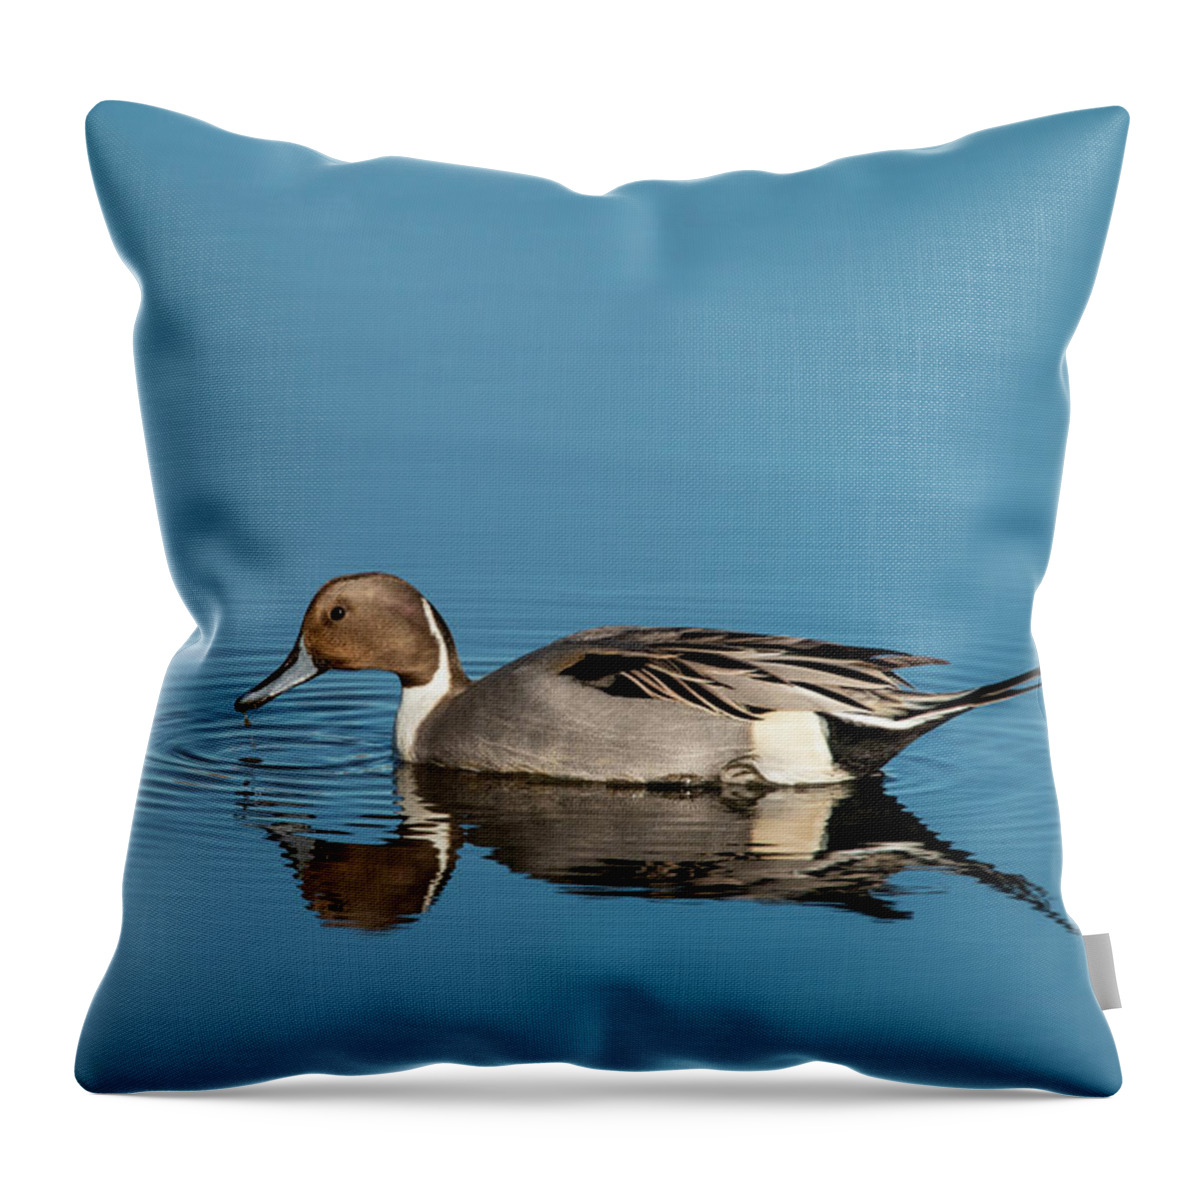 Pintail Throw Pillow featuring the photograph Pintail Reflections by Kristia Adams